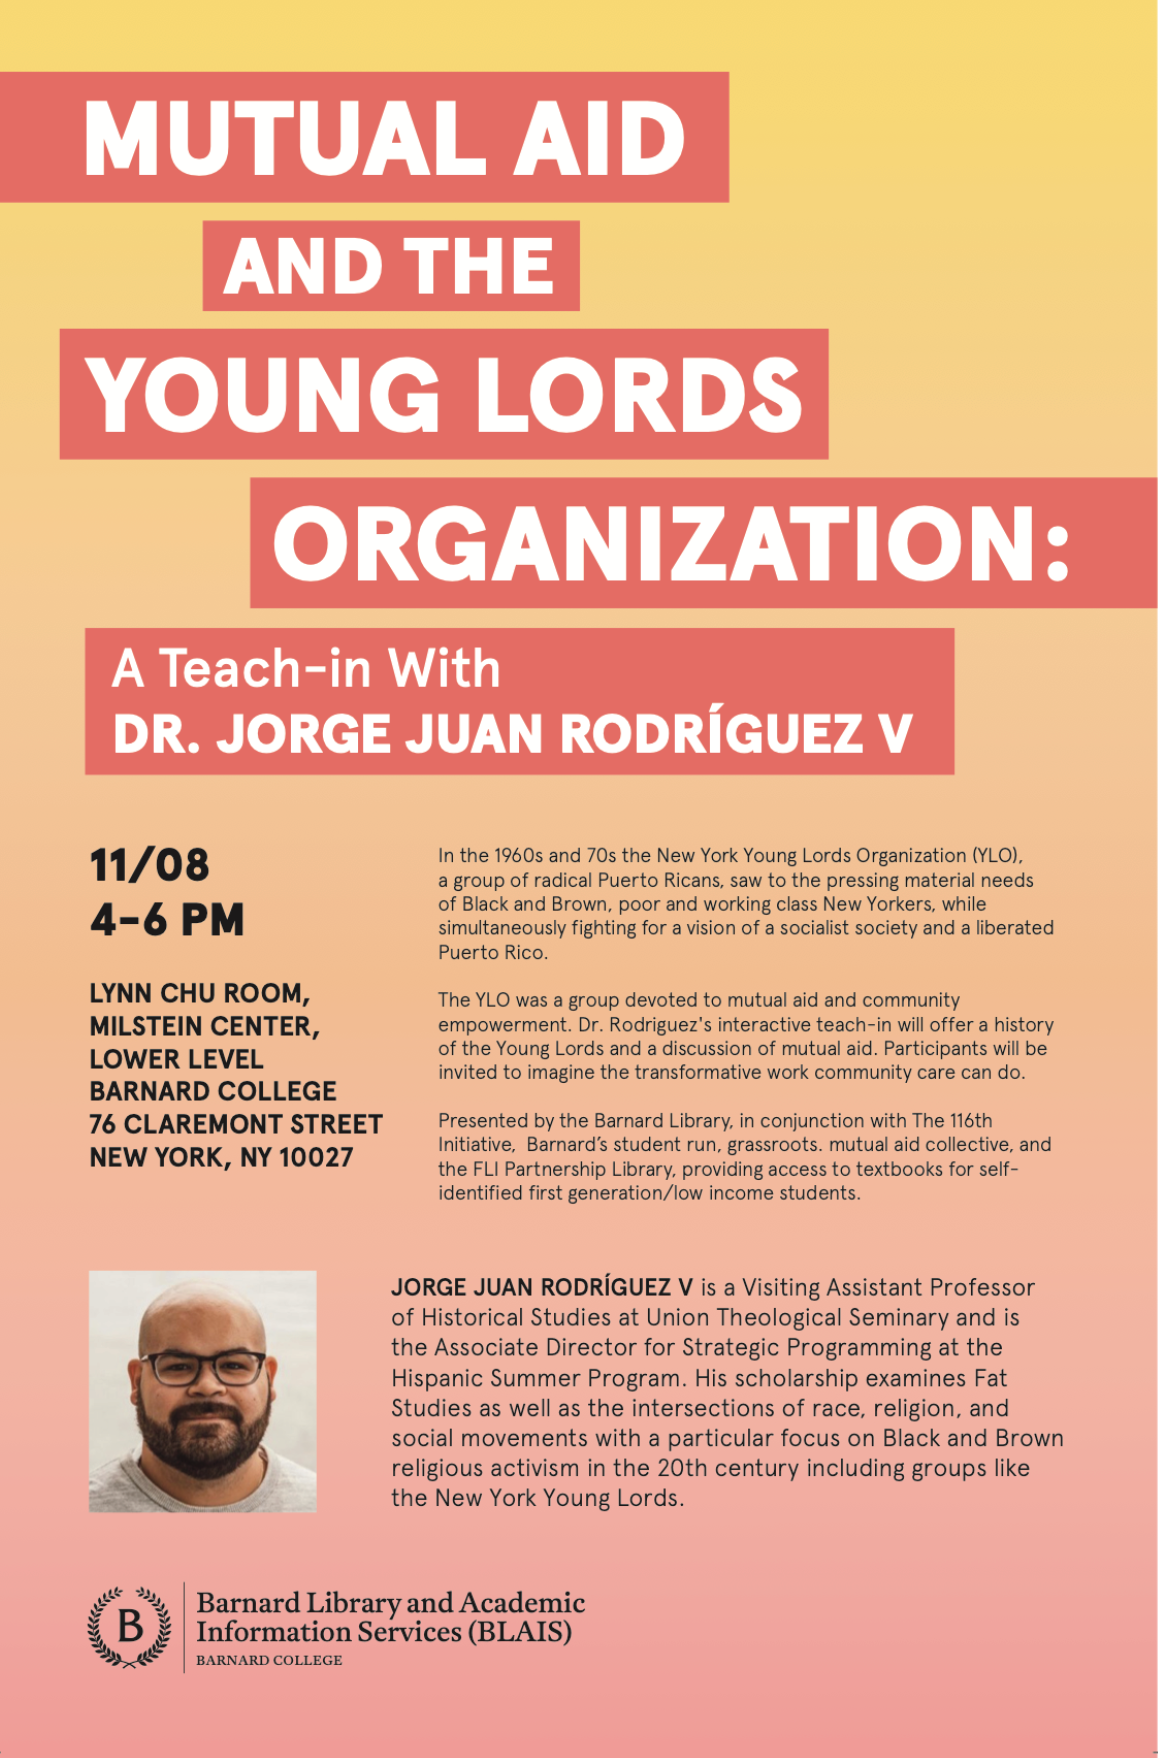 This is a poster for the Mutual Aid and The Young Lords Organization event.